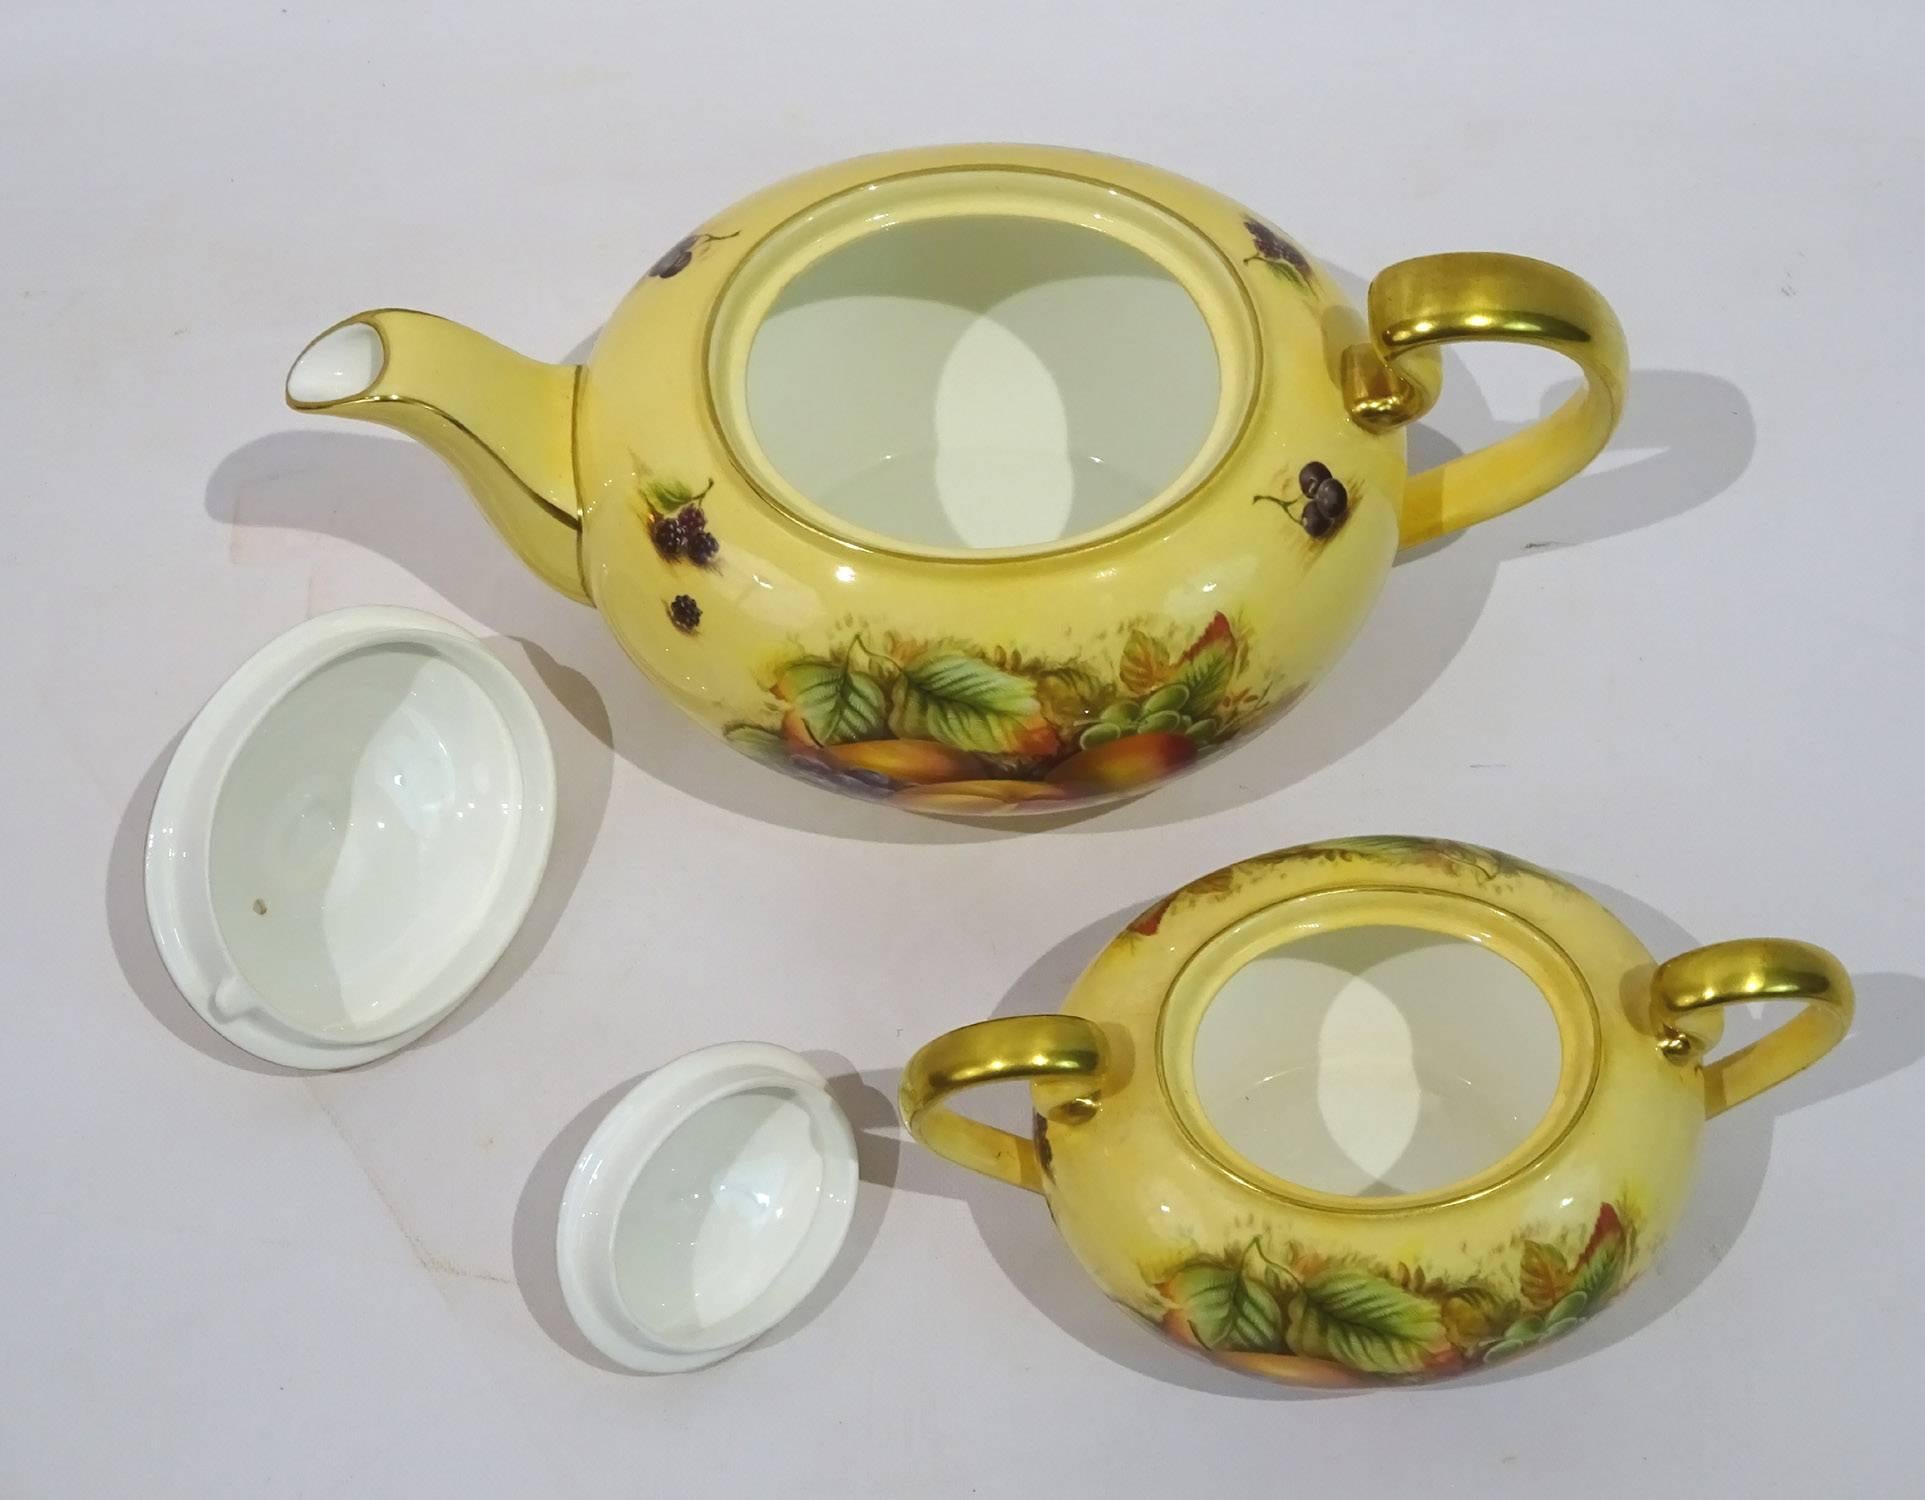 20th Century Orchard Gold China Tea/Dessert Service by John Aynsley For Sale 2